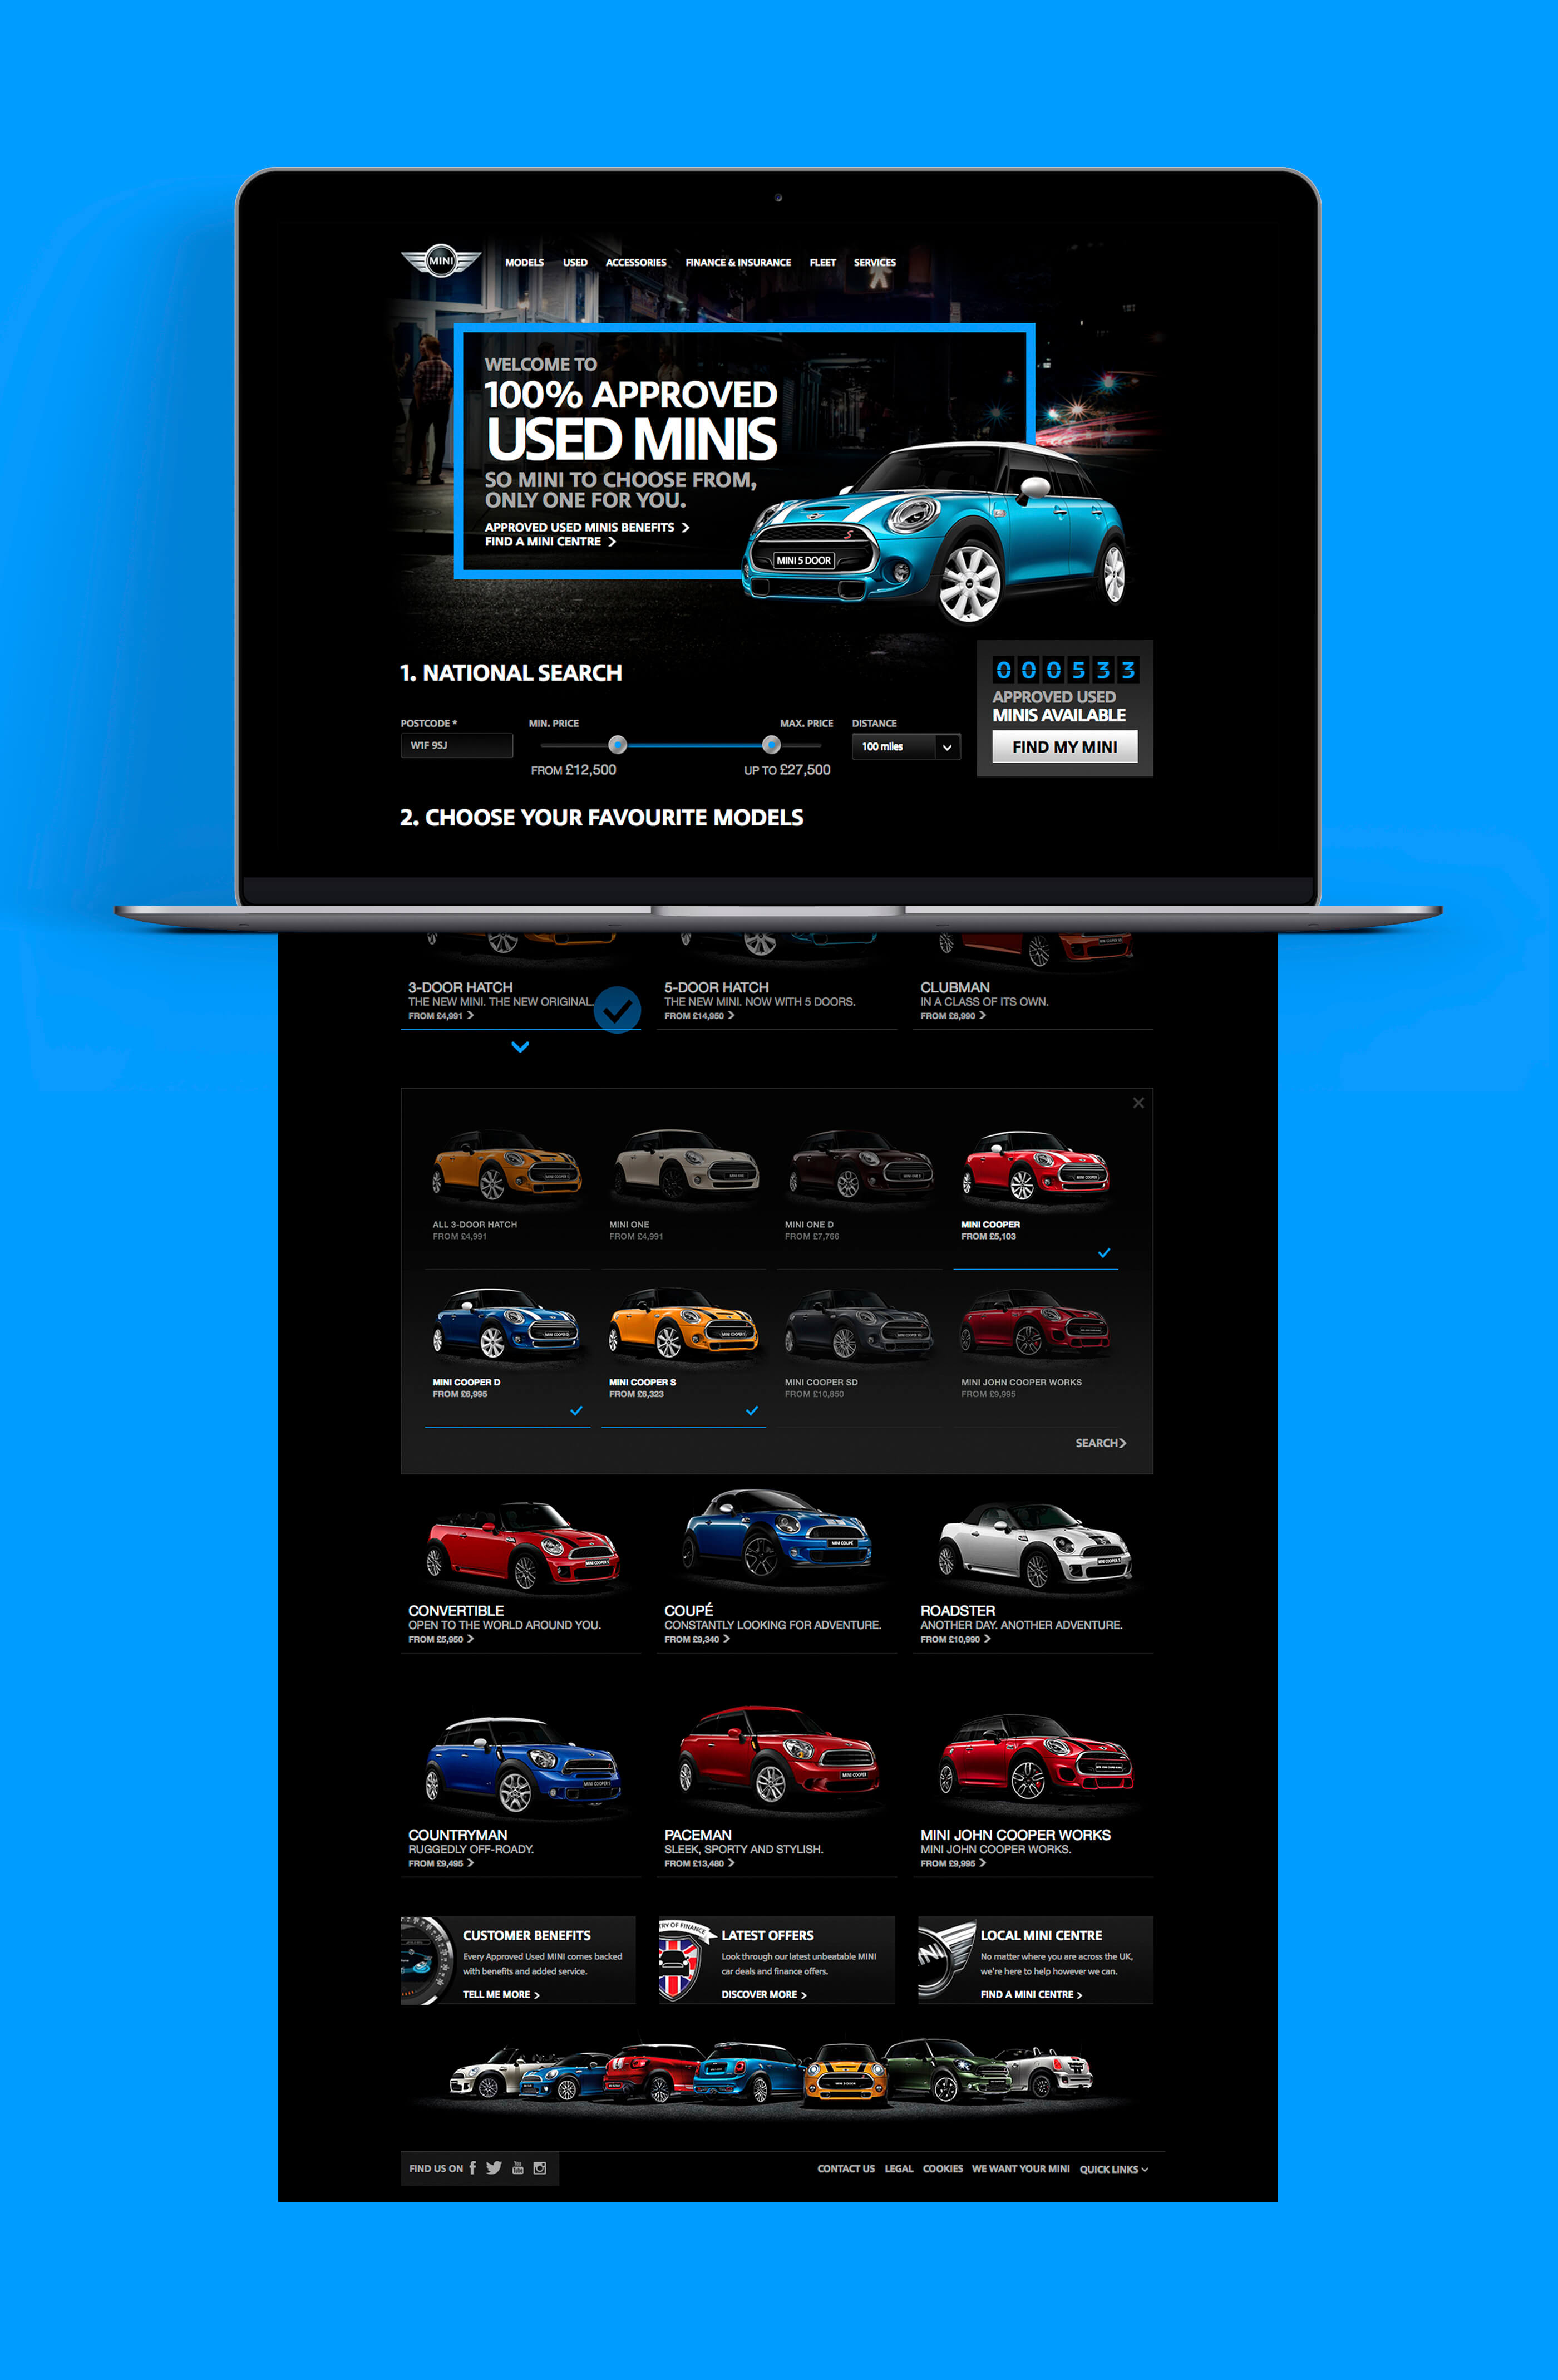 Full homepage design for BMW Mini, superimposed onto an Apple MacBook on a bright blue background